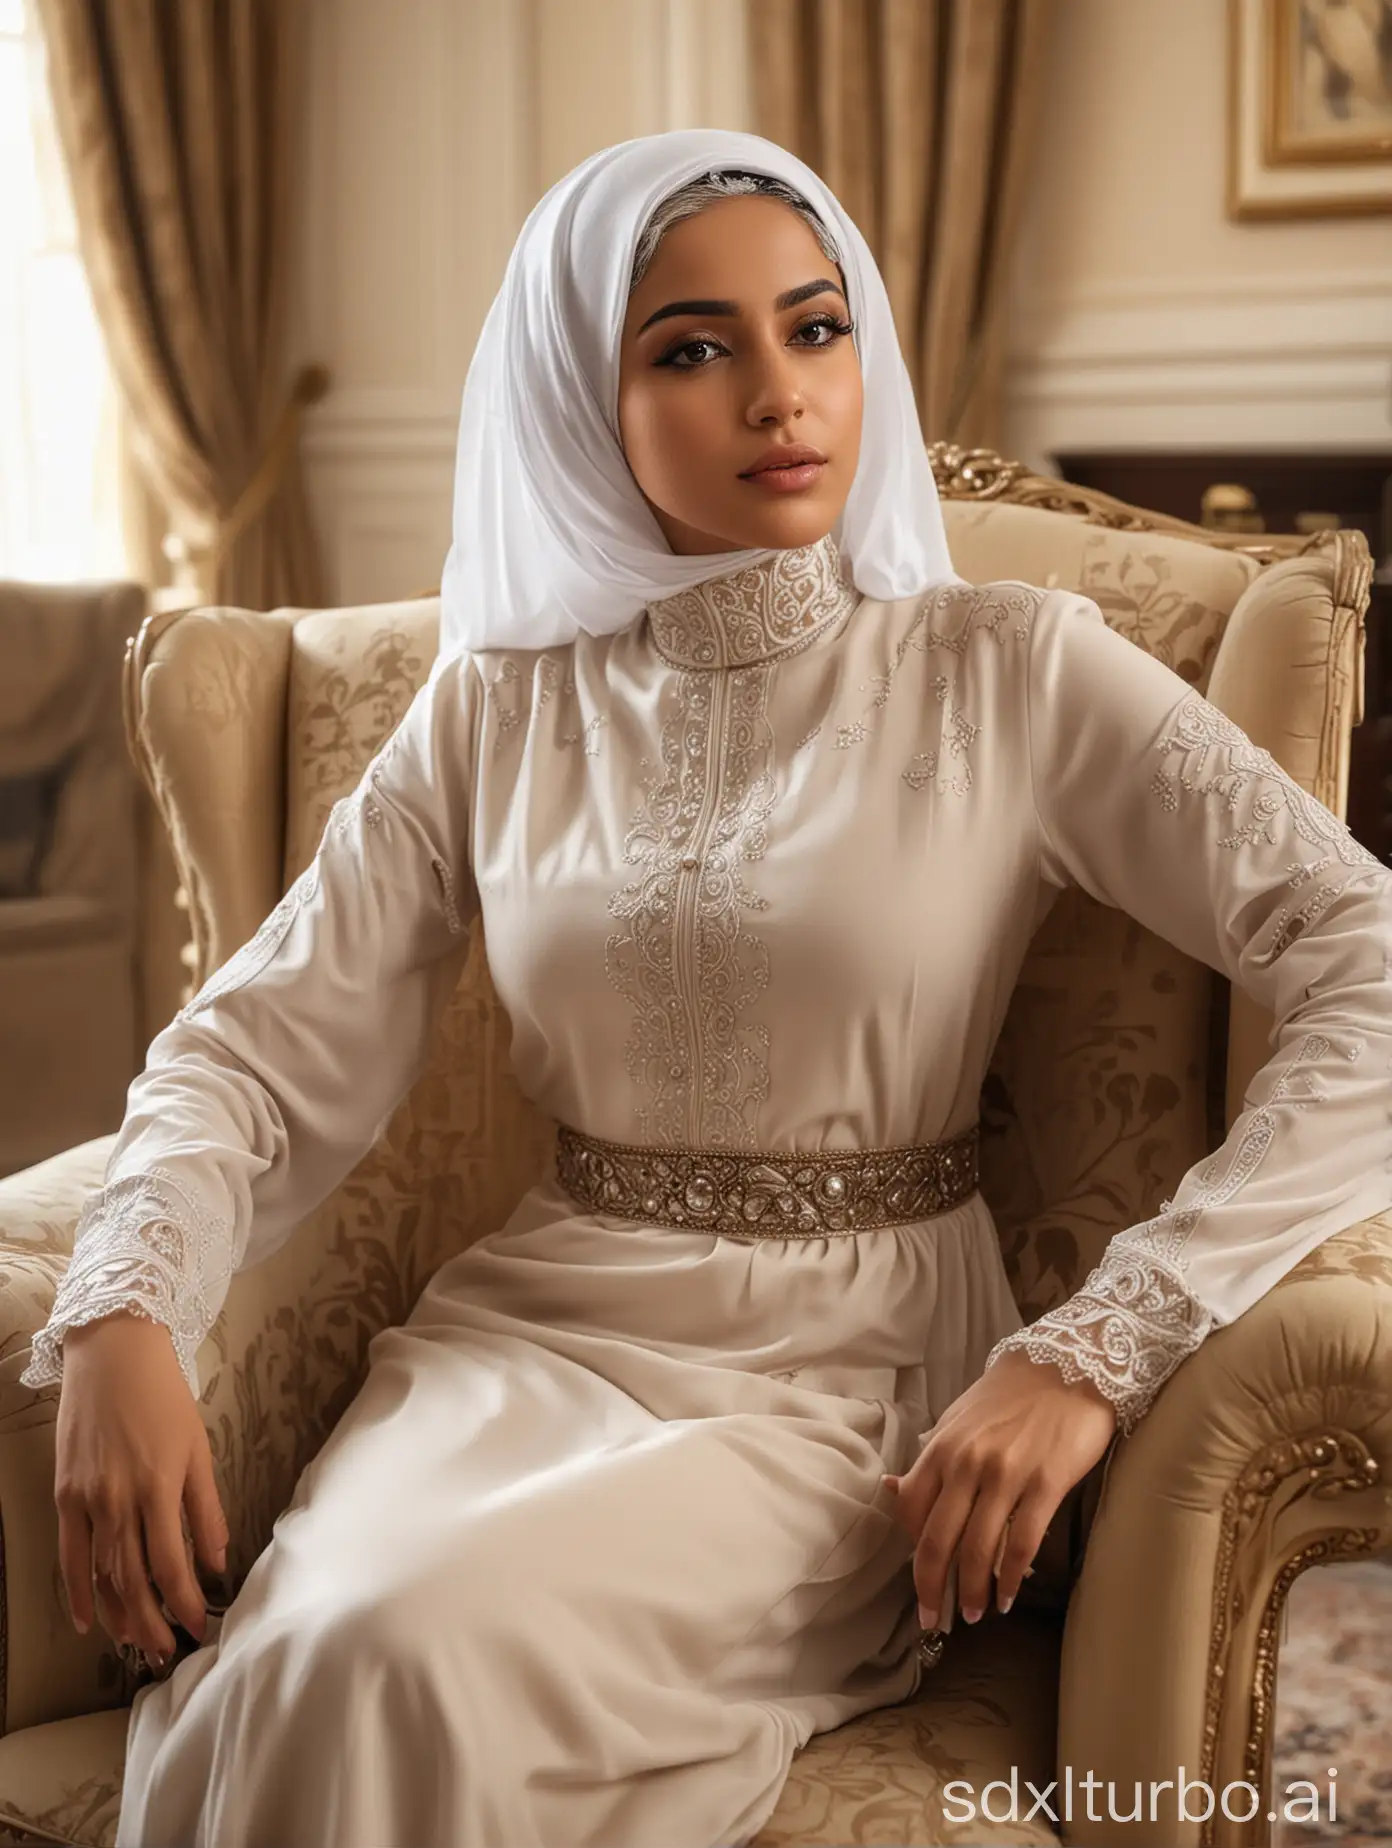 Beautiful Saudi Arabian woman wearing an expensive white hijab and a long beige dress, Sharp features, jawline, dark skin, eyeliner, Rich, inside rich mansion, sitting on an expensive armchair, portrait, curvy